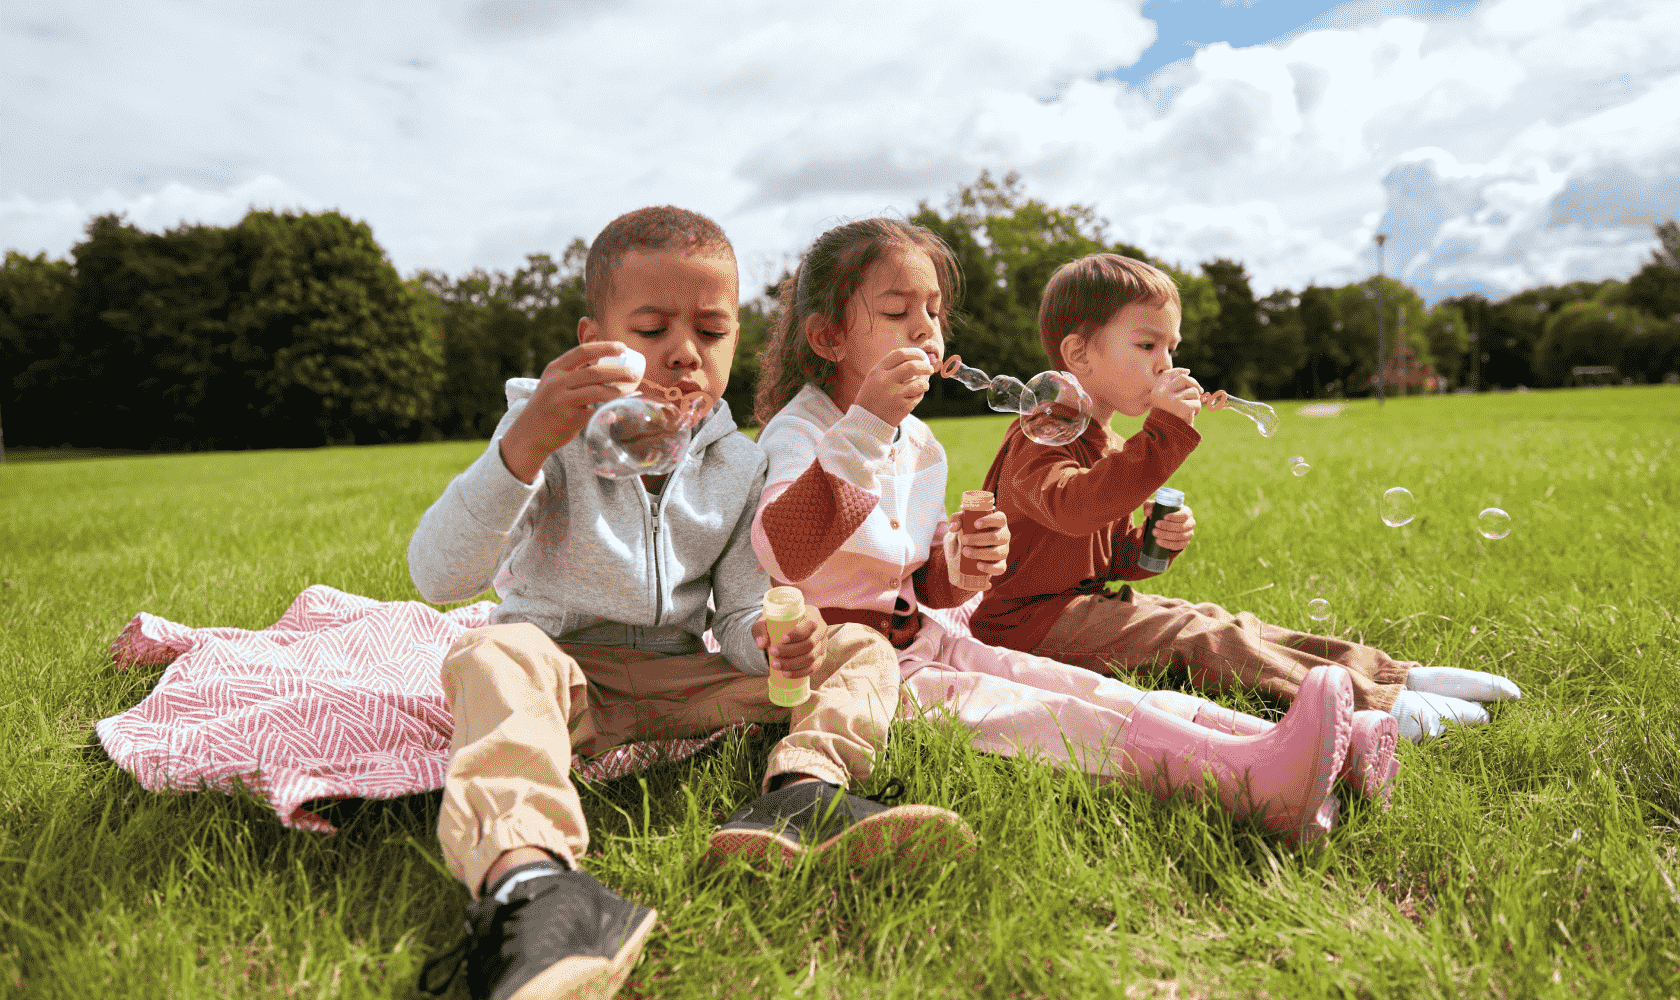 A group of happy children play outside, blowing bubbles.